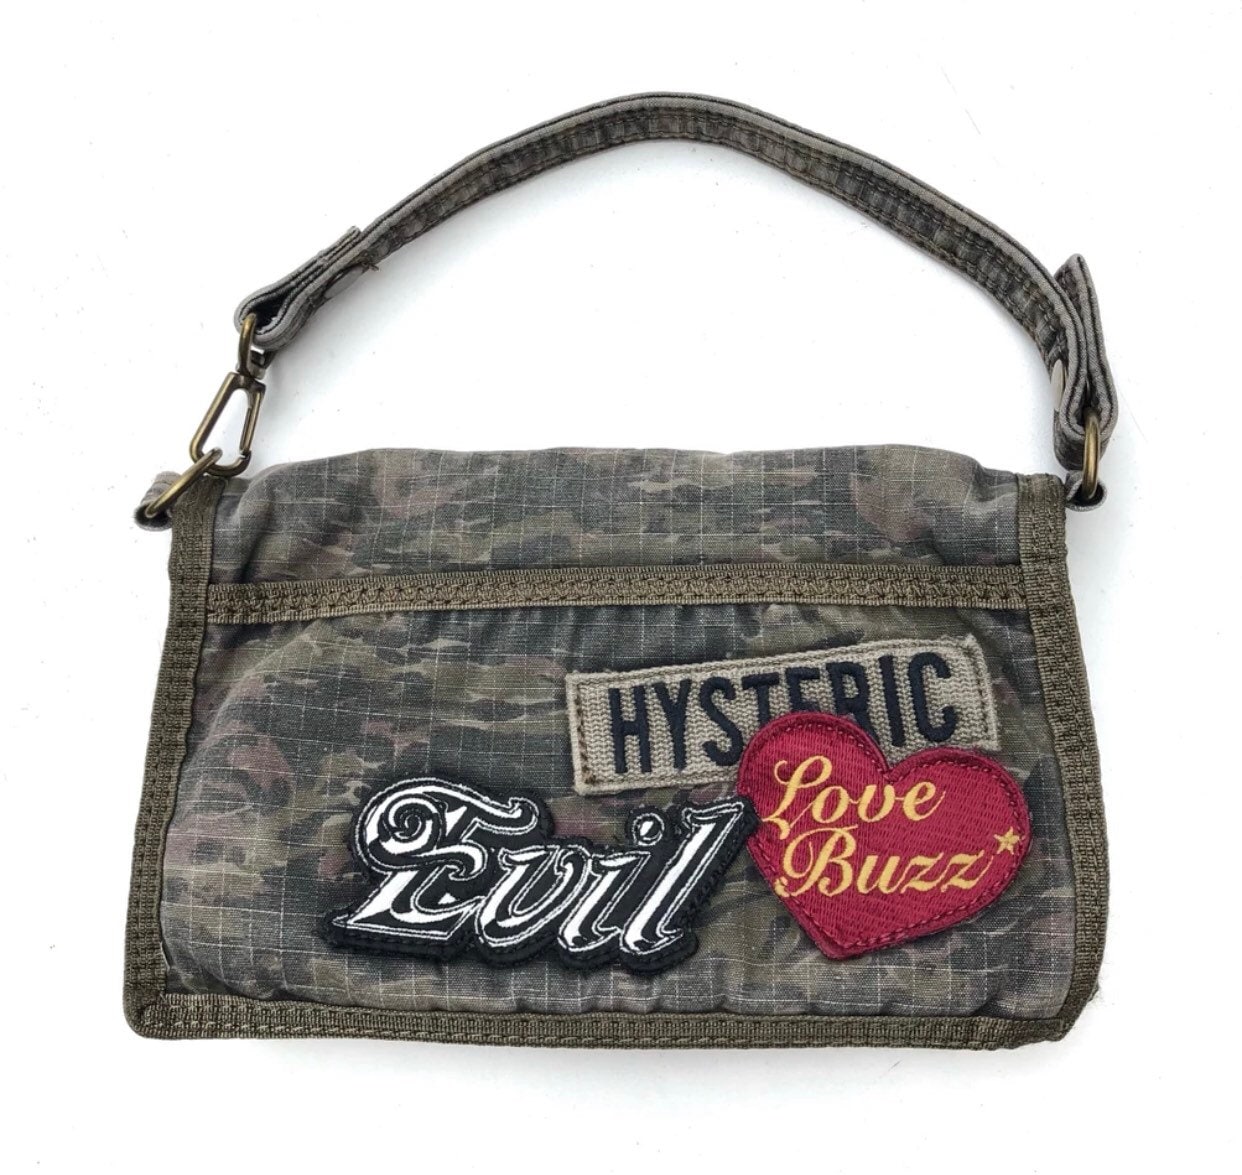 Hysteric Glamour Bag - Etsy